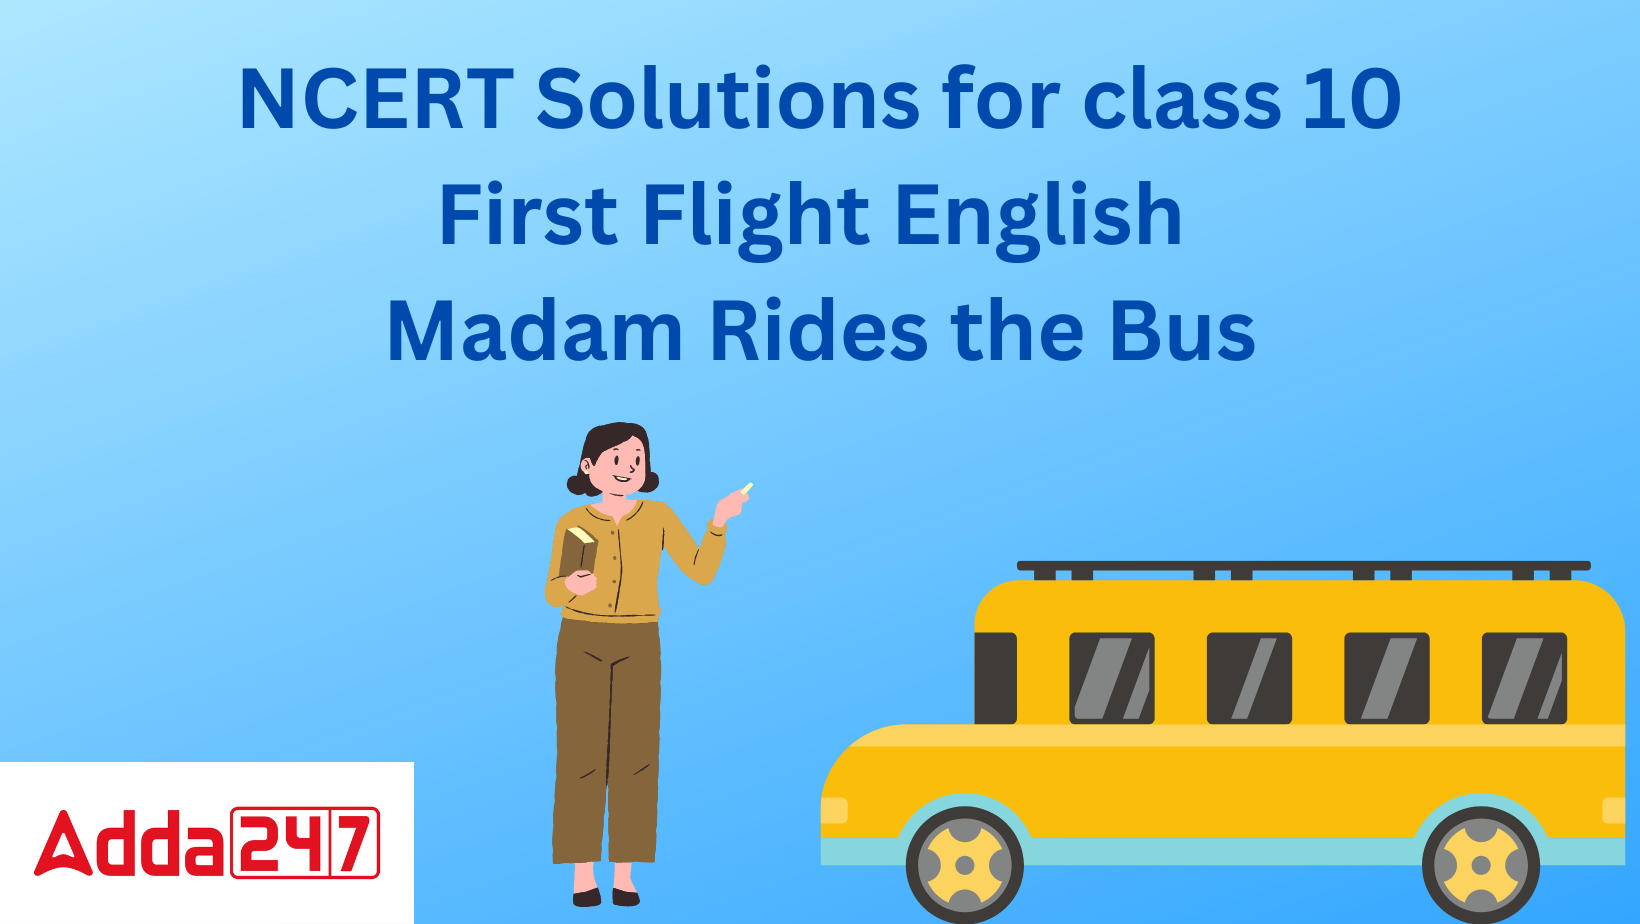 NCERT Solutions for class 10 First Flight English Madam Rides the Bus